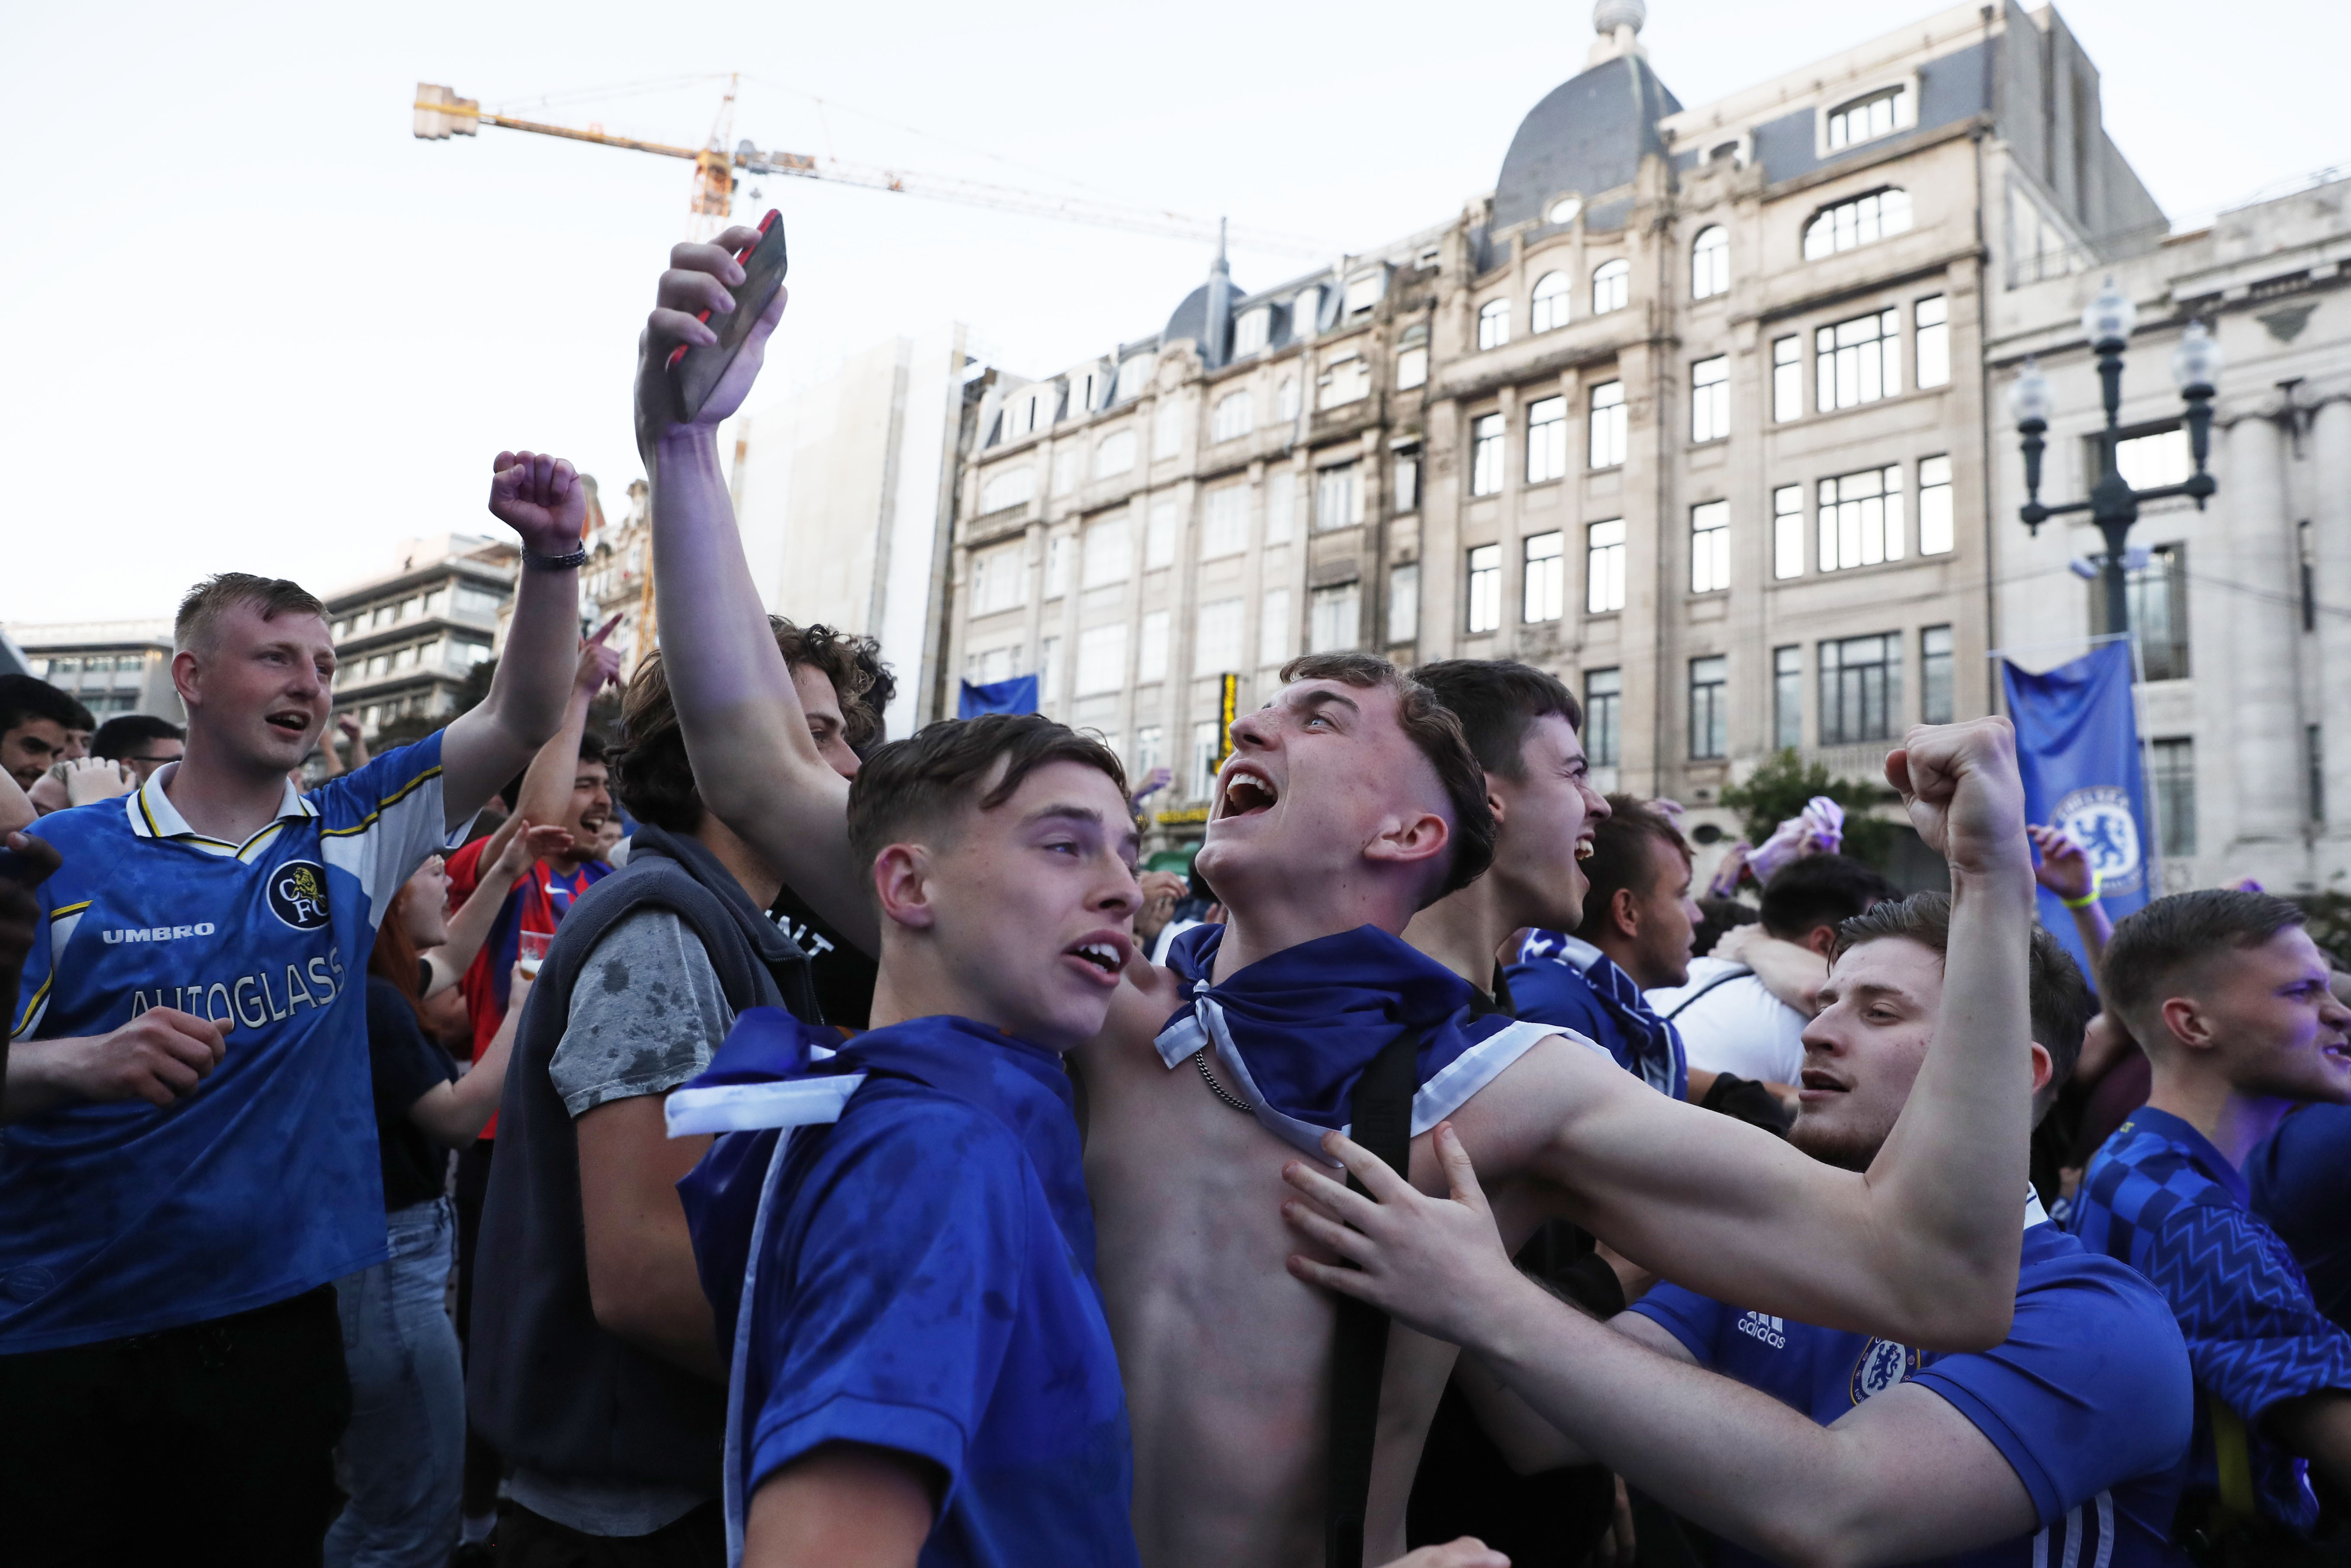 Soccer Football - Champions League - Fans in Porto during the Champions League Final Manchester City v Chelsea - Porto, Portugal - May 29, 2021 Chelsea fans celebrate after Kai Havertz scored their first goal REUTERS/Pedro Nunes